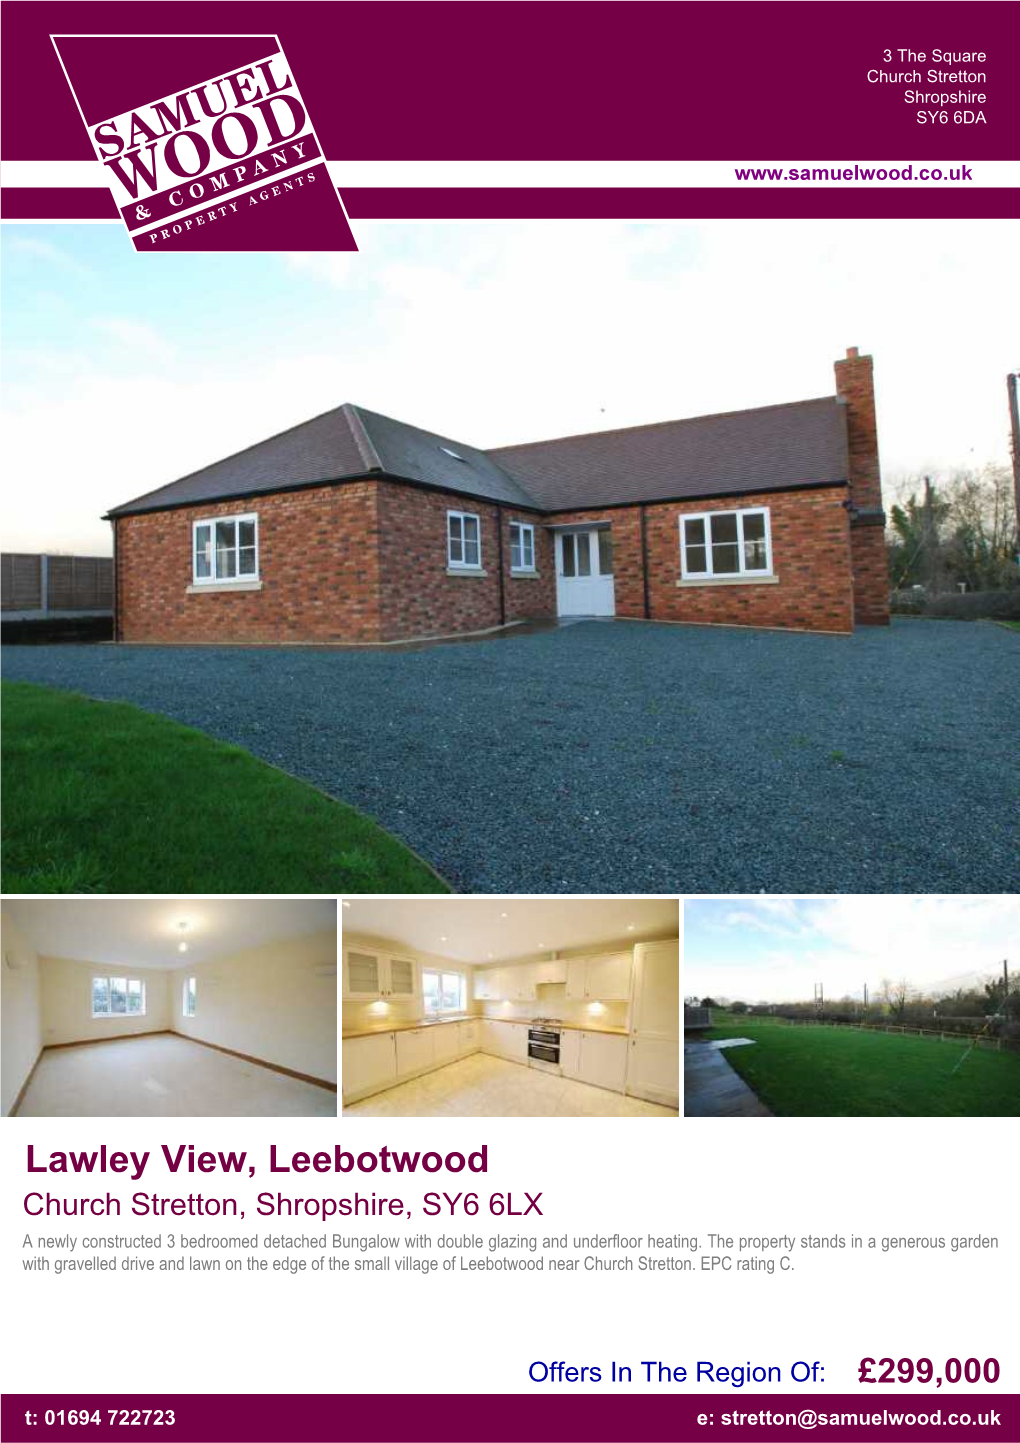 Lawley View, Leebotwood Church Stretton, Shropshire, SY6 6LX a Newly Constructed 3 Bedroomed Detached Bungalow with Double Glazing and Underfloor Heating